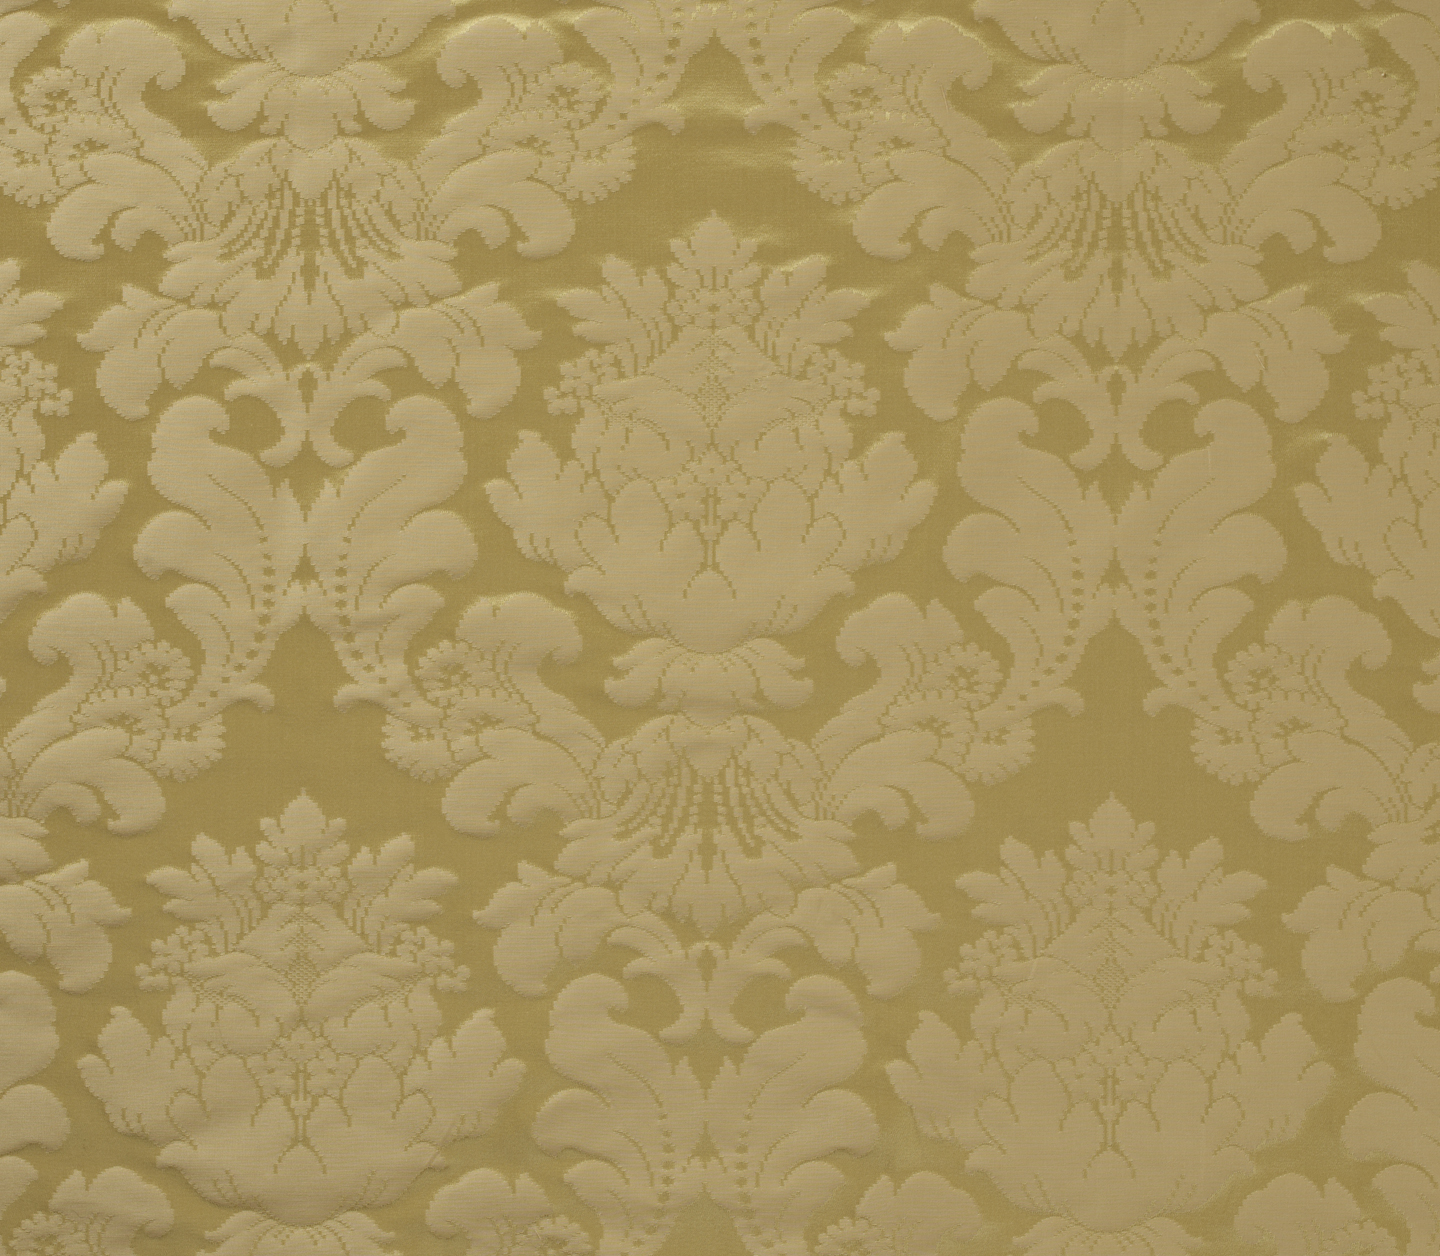 Related Pictures Gold Background Royal Damask Ornament Vintage Rich